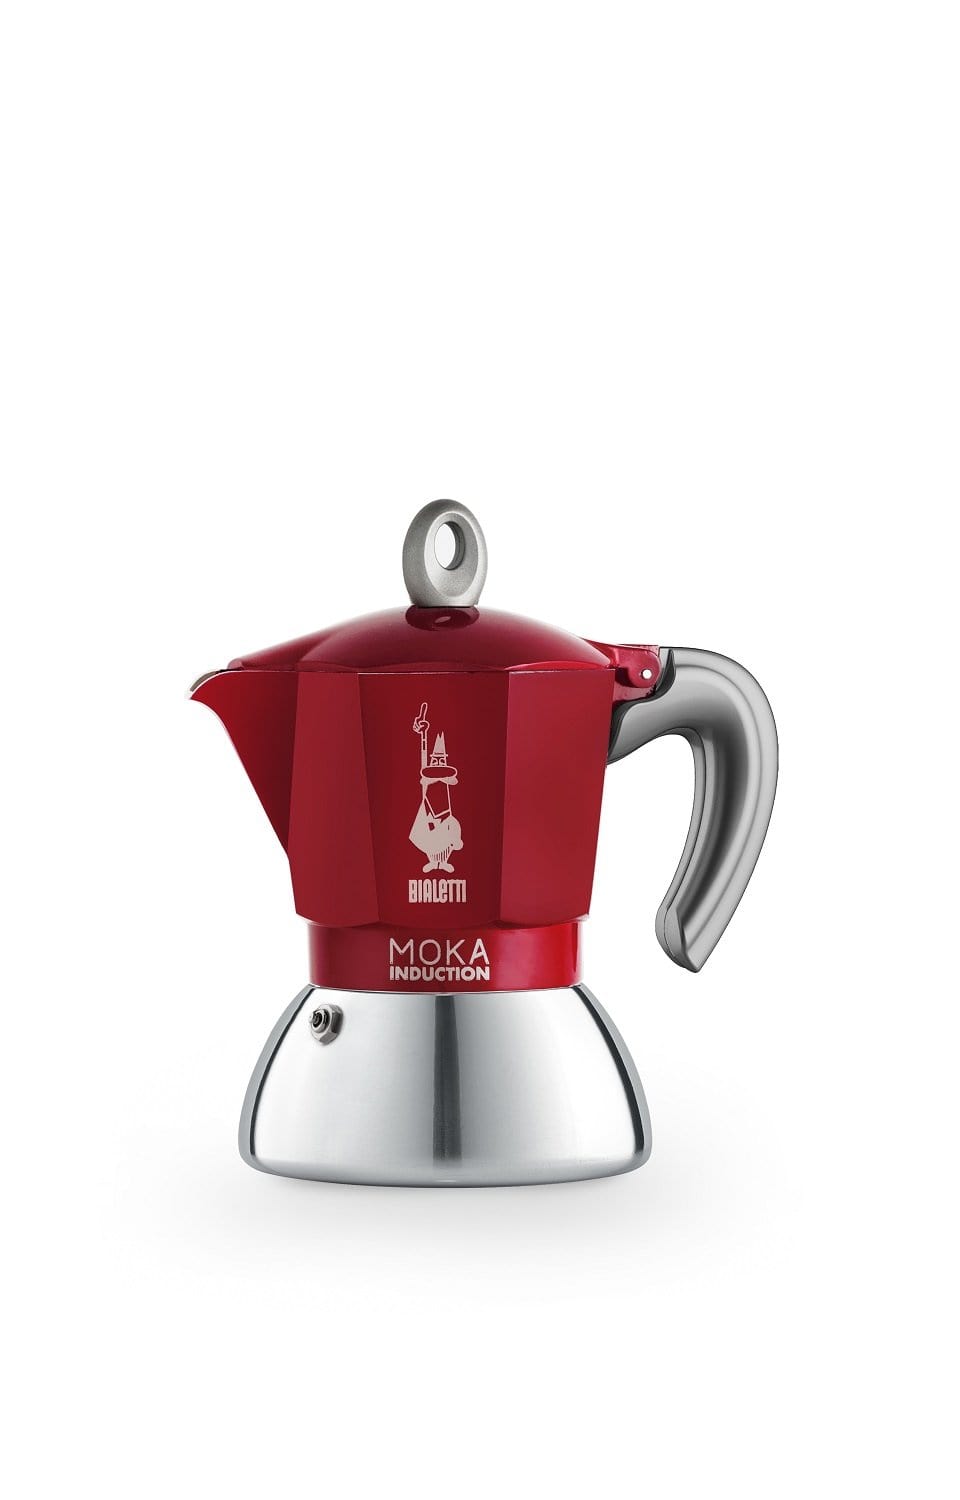 BIALETTI NEW MOKA INDUCTION COFFEE MAKER RED 2 CUPS - 6942